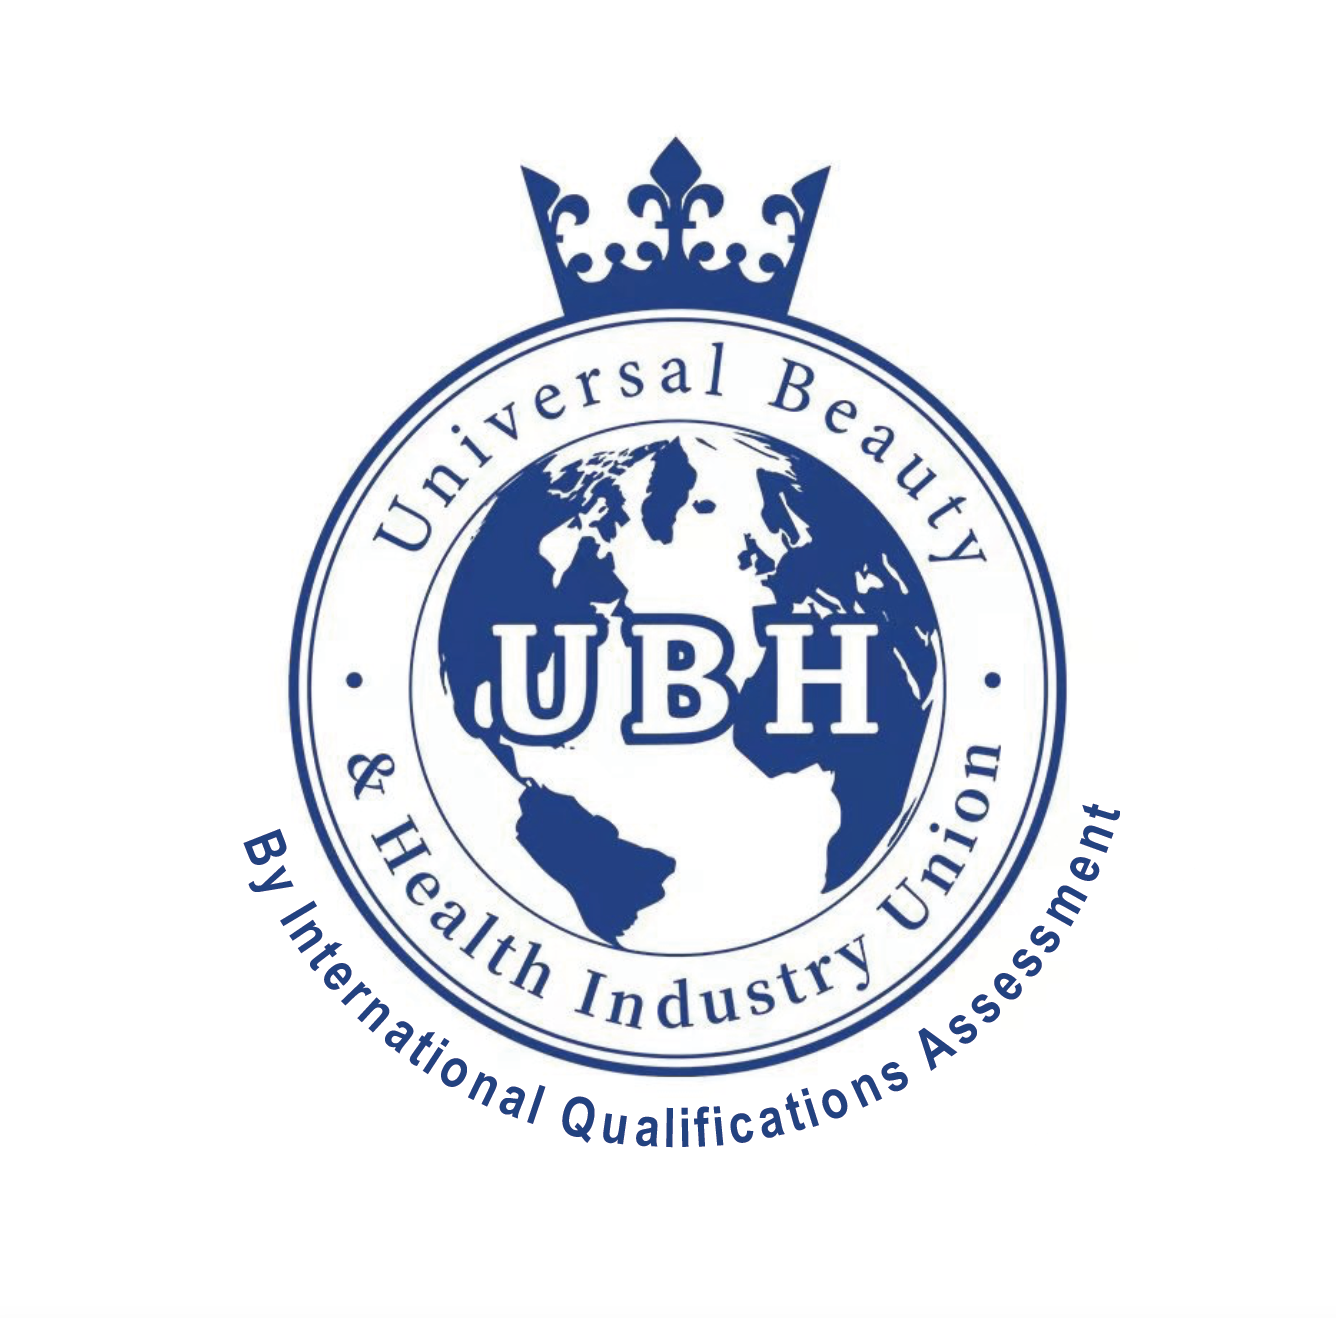 UBH-Universal-Beauty-and-Health-Industry-Union-by-International-qualifications-Assessment